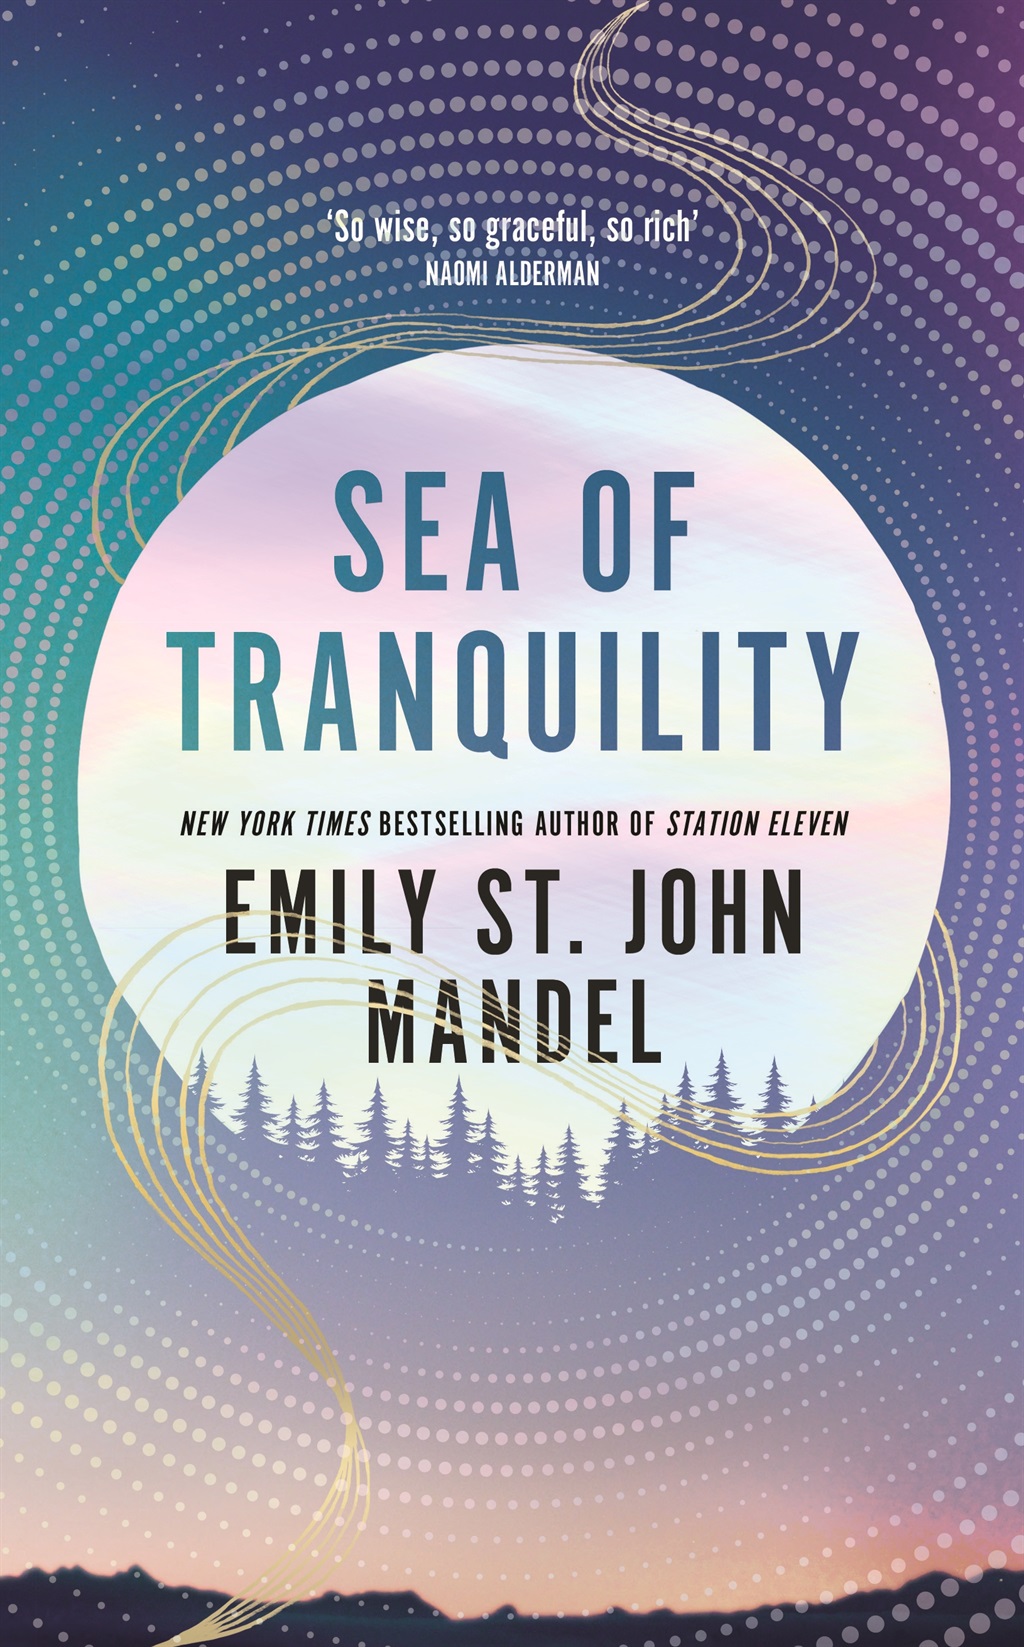 Sea of Tranquility by Emily St John Mandel (Picador). 